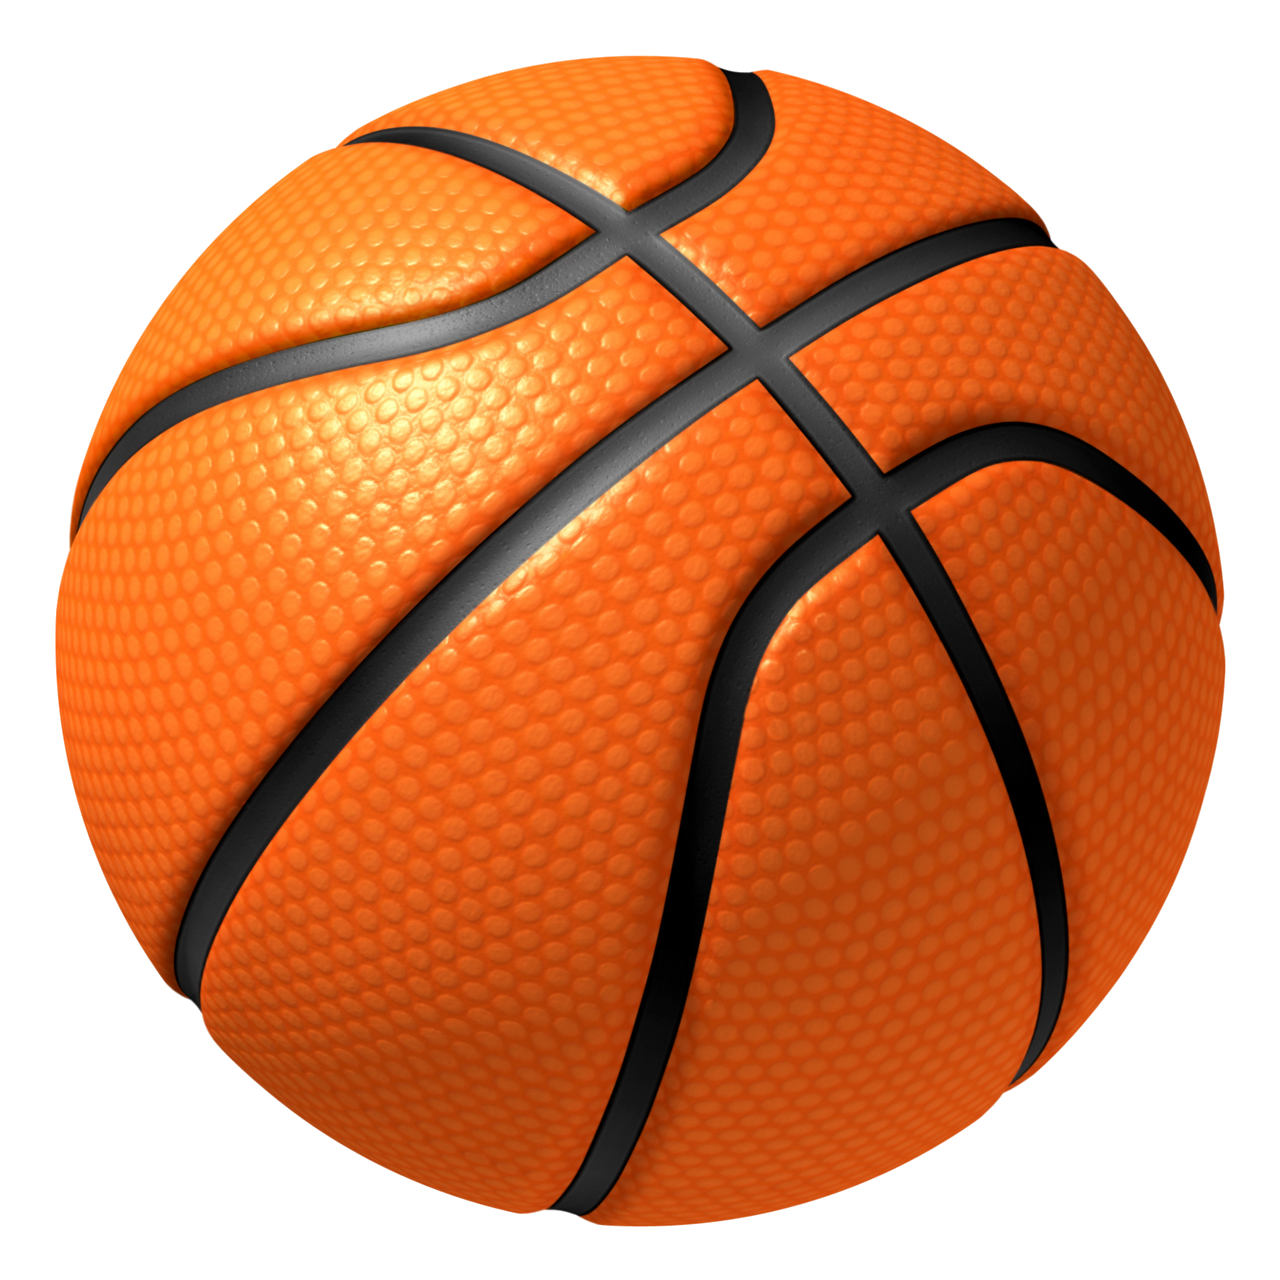 Image for Basketball Clipart 